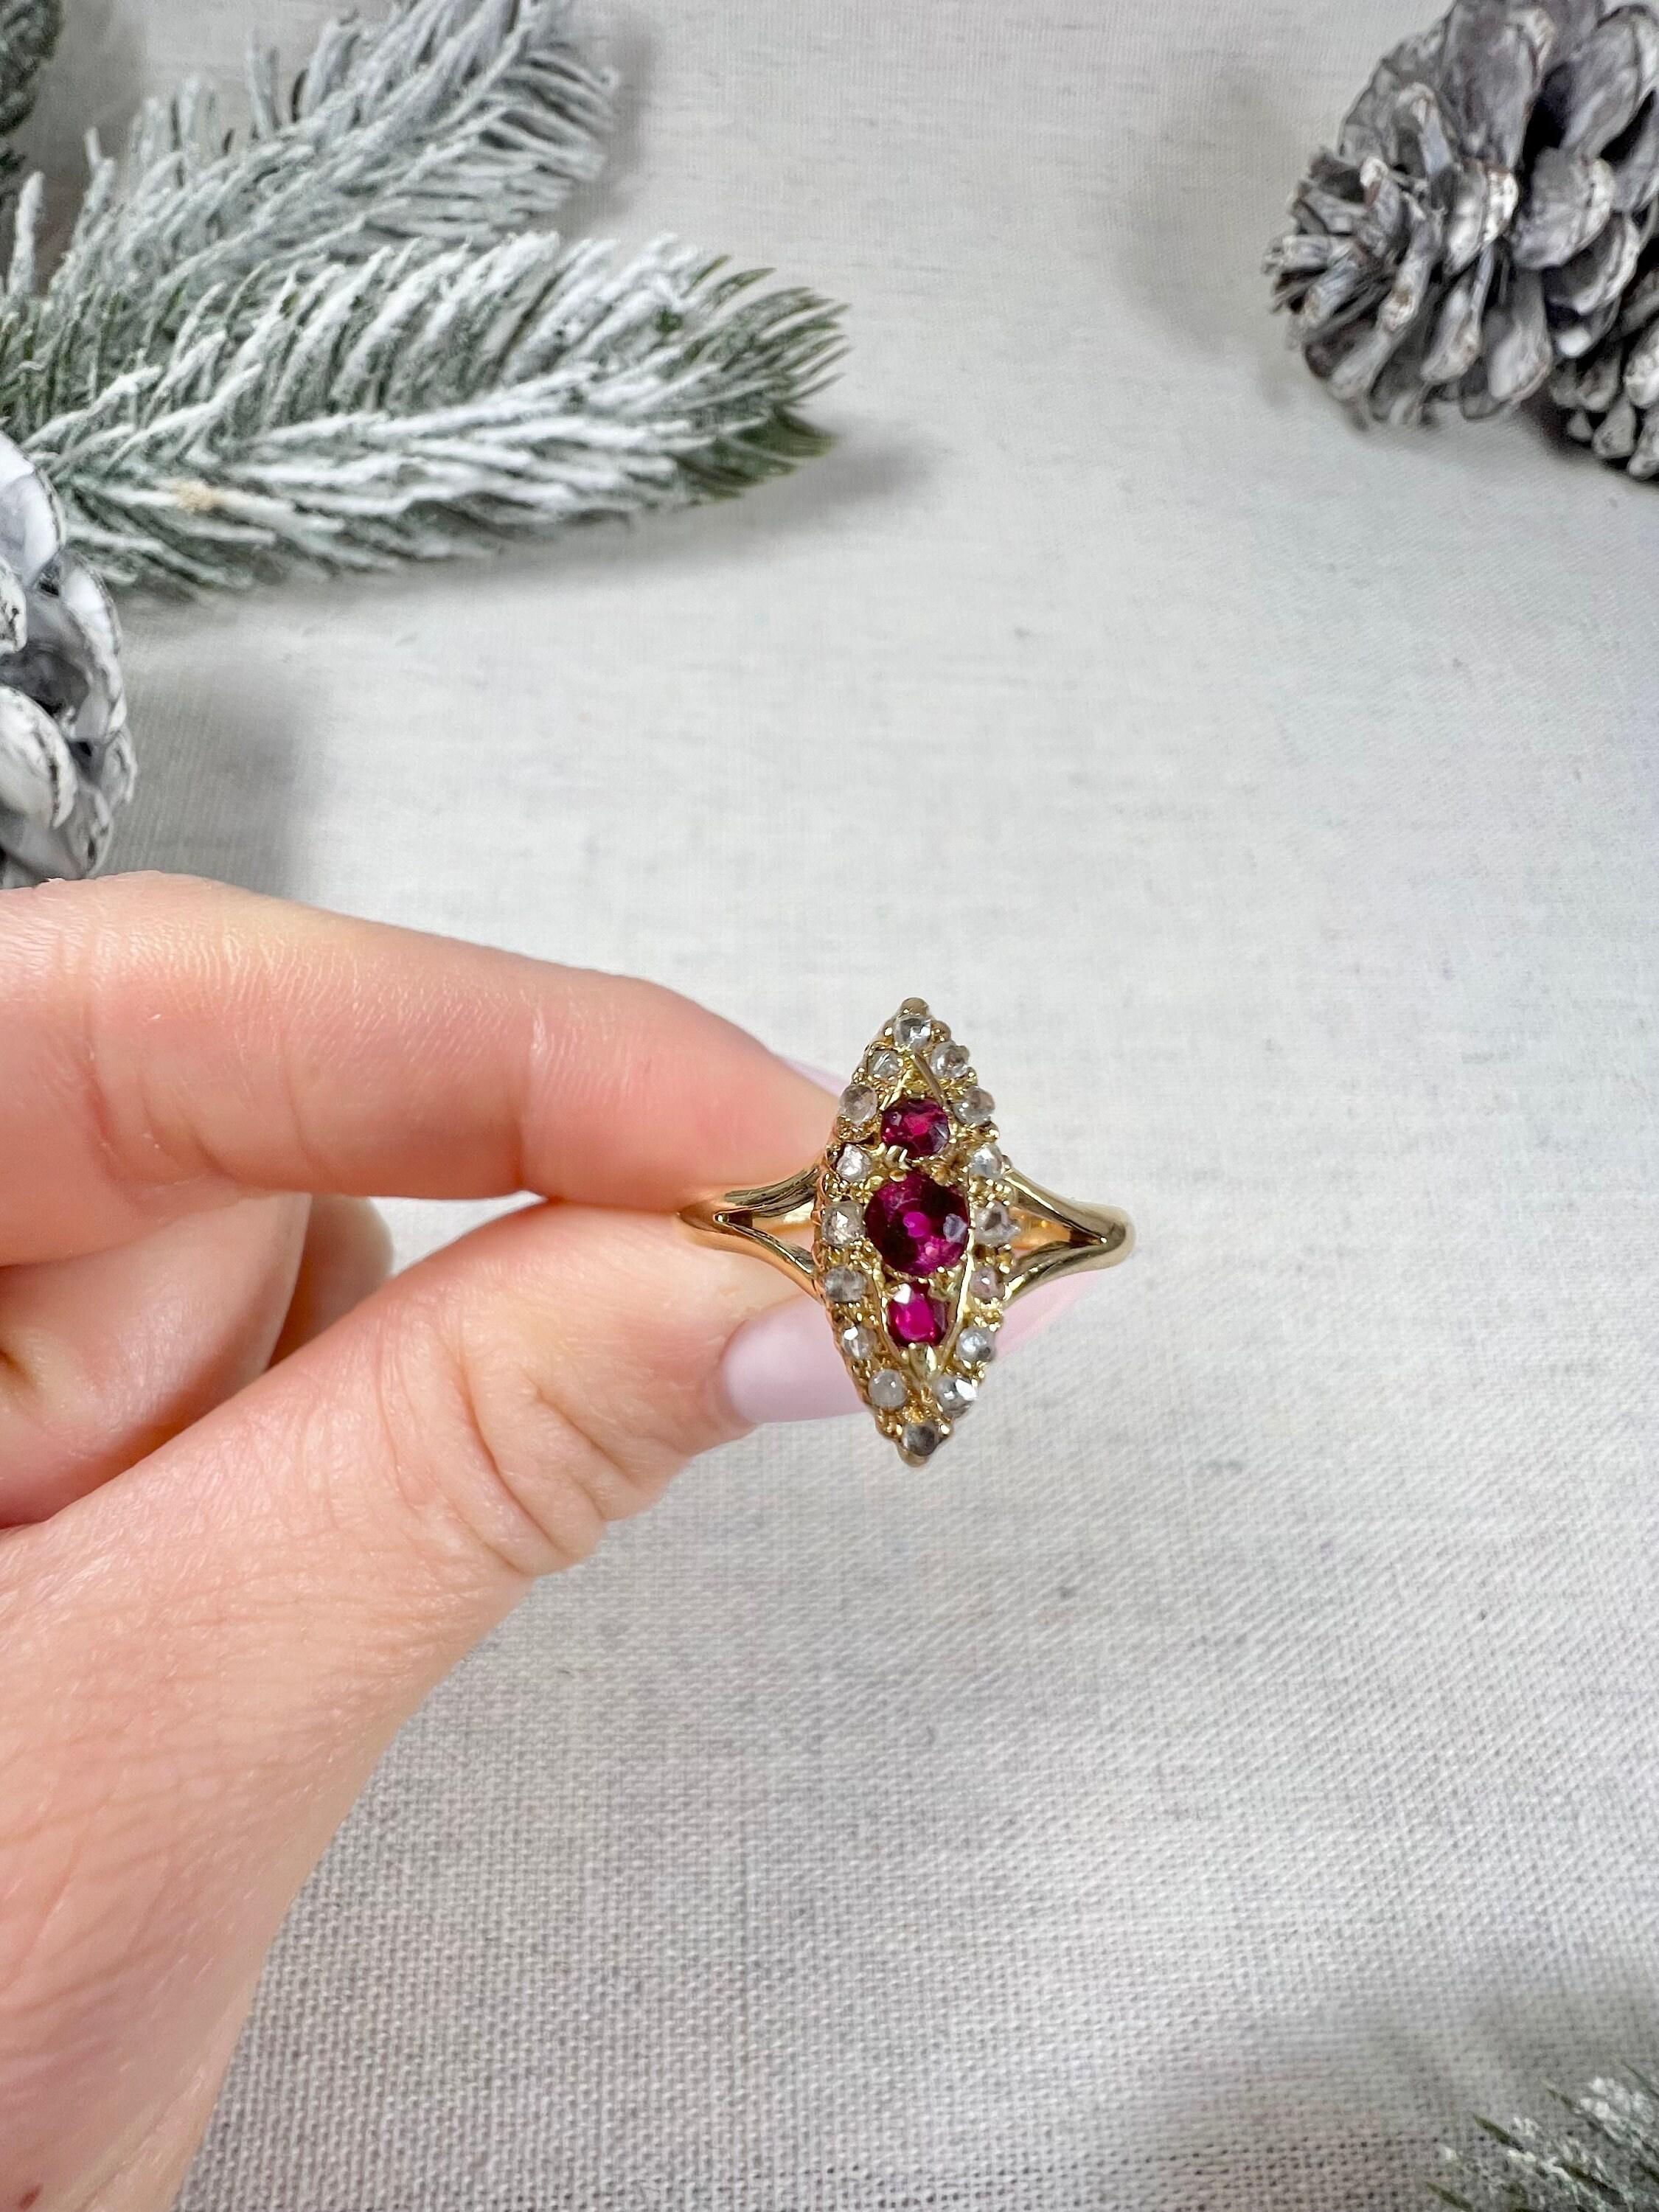 Antique Ruby & Diamond Marquise Ring 

18ct Gold Tested

Circa 1880 

This Victorian marquise-shaped ring is a true beauty. Crafted from 18ct yellow gold, the ring features a row of three natural rubies set down the centre, each one sparkling with